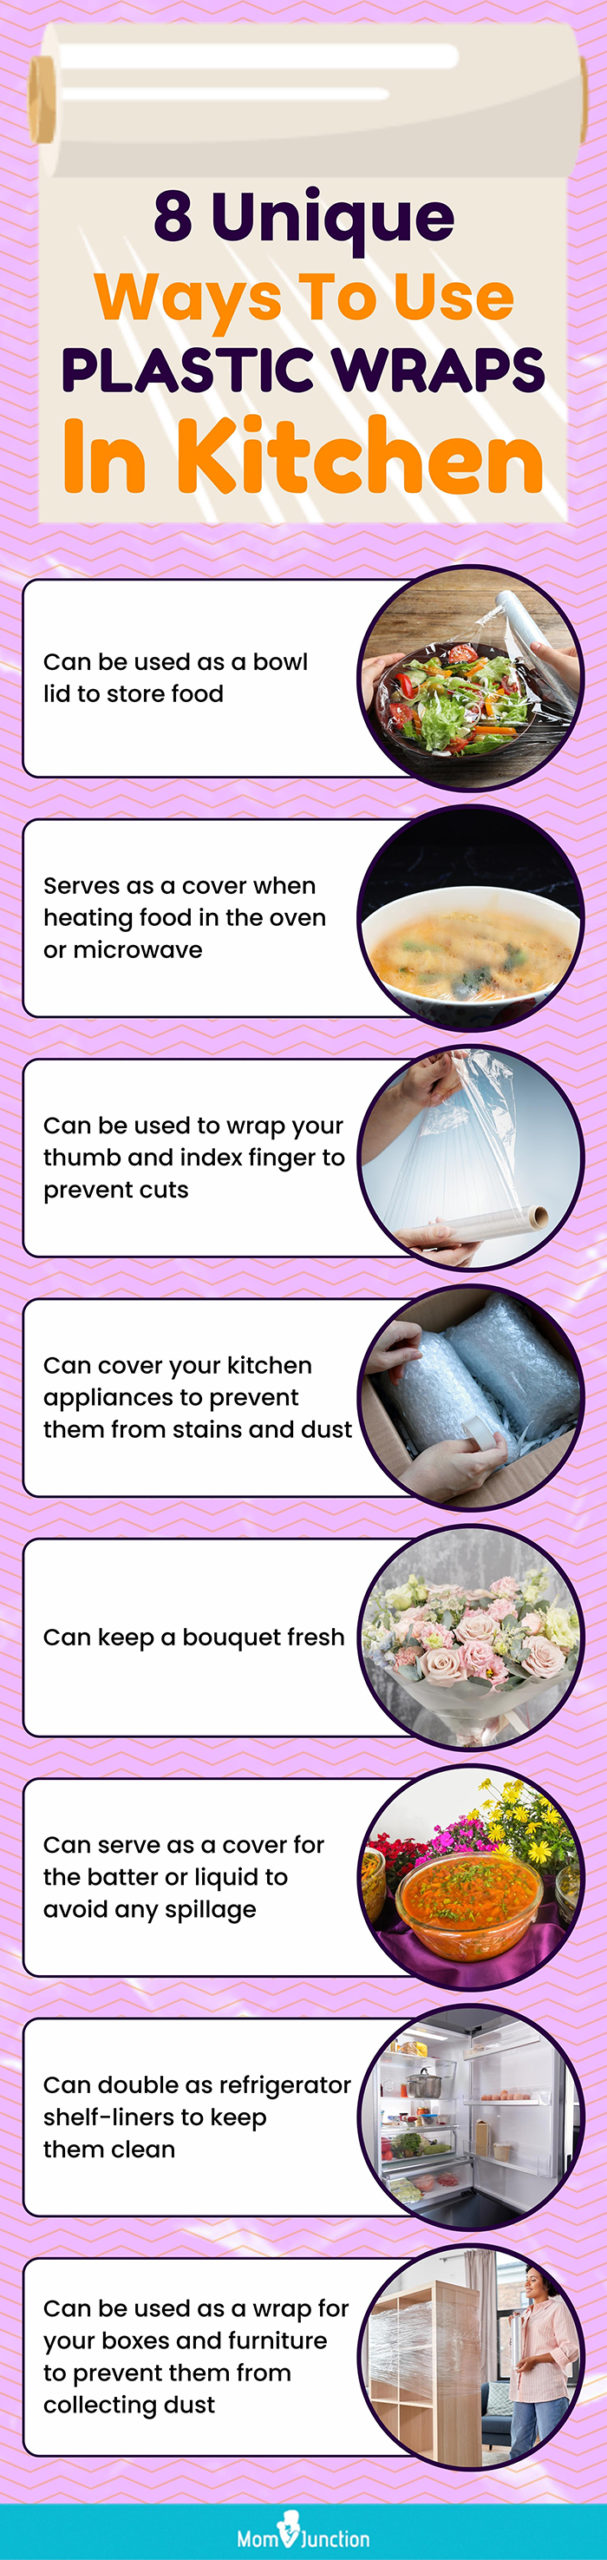 https://www.momjunction.com/wp-content/uploads/2020/09/Infographic-Creative-Uses-Of-Plastic-Wraps-In-Kitchen-scaled.jpg